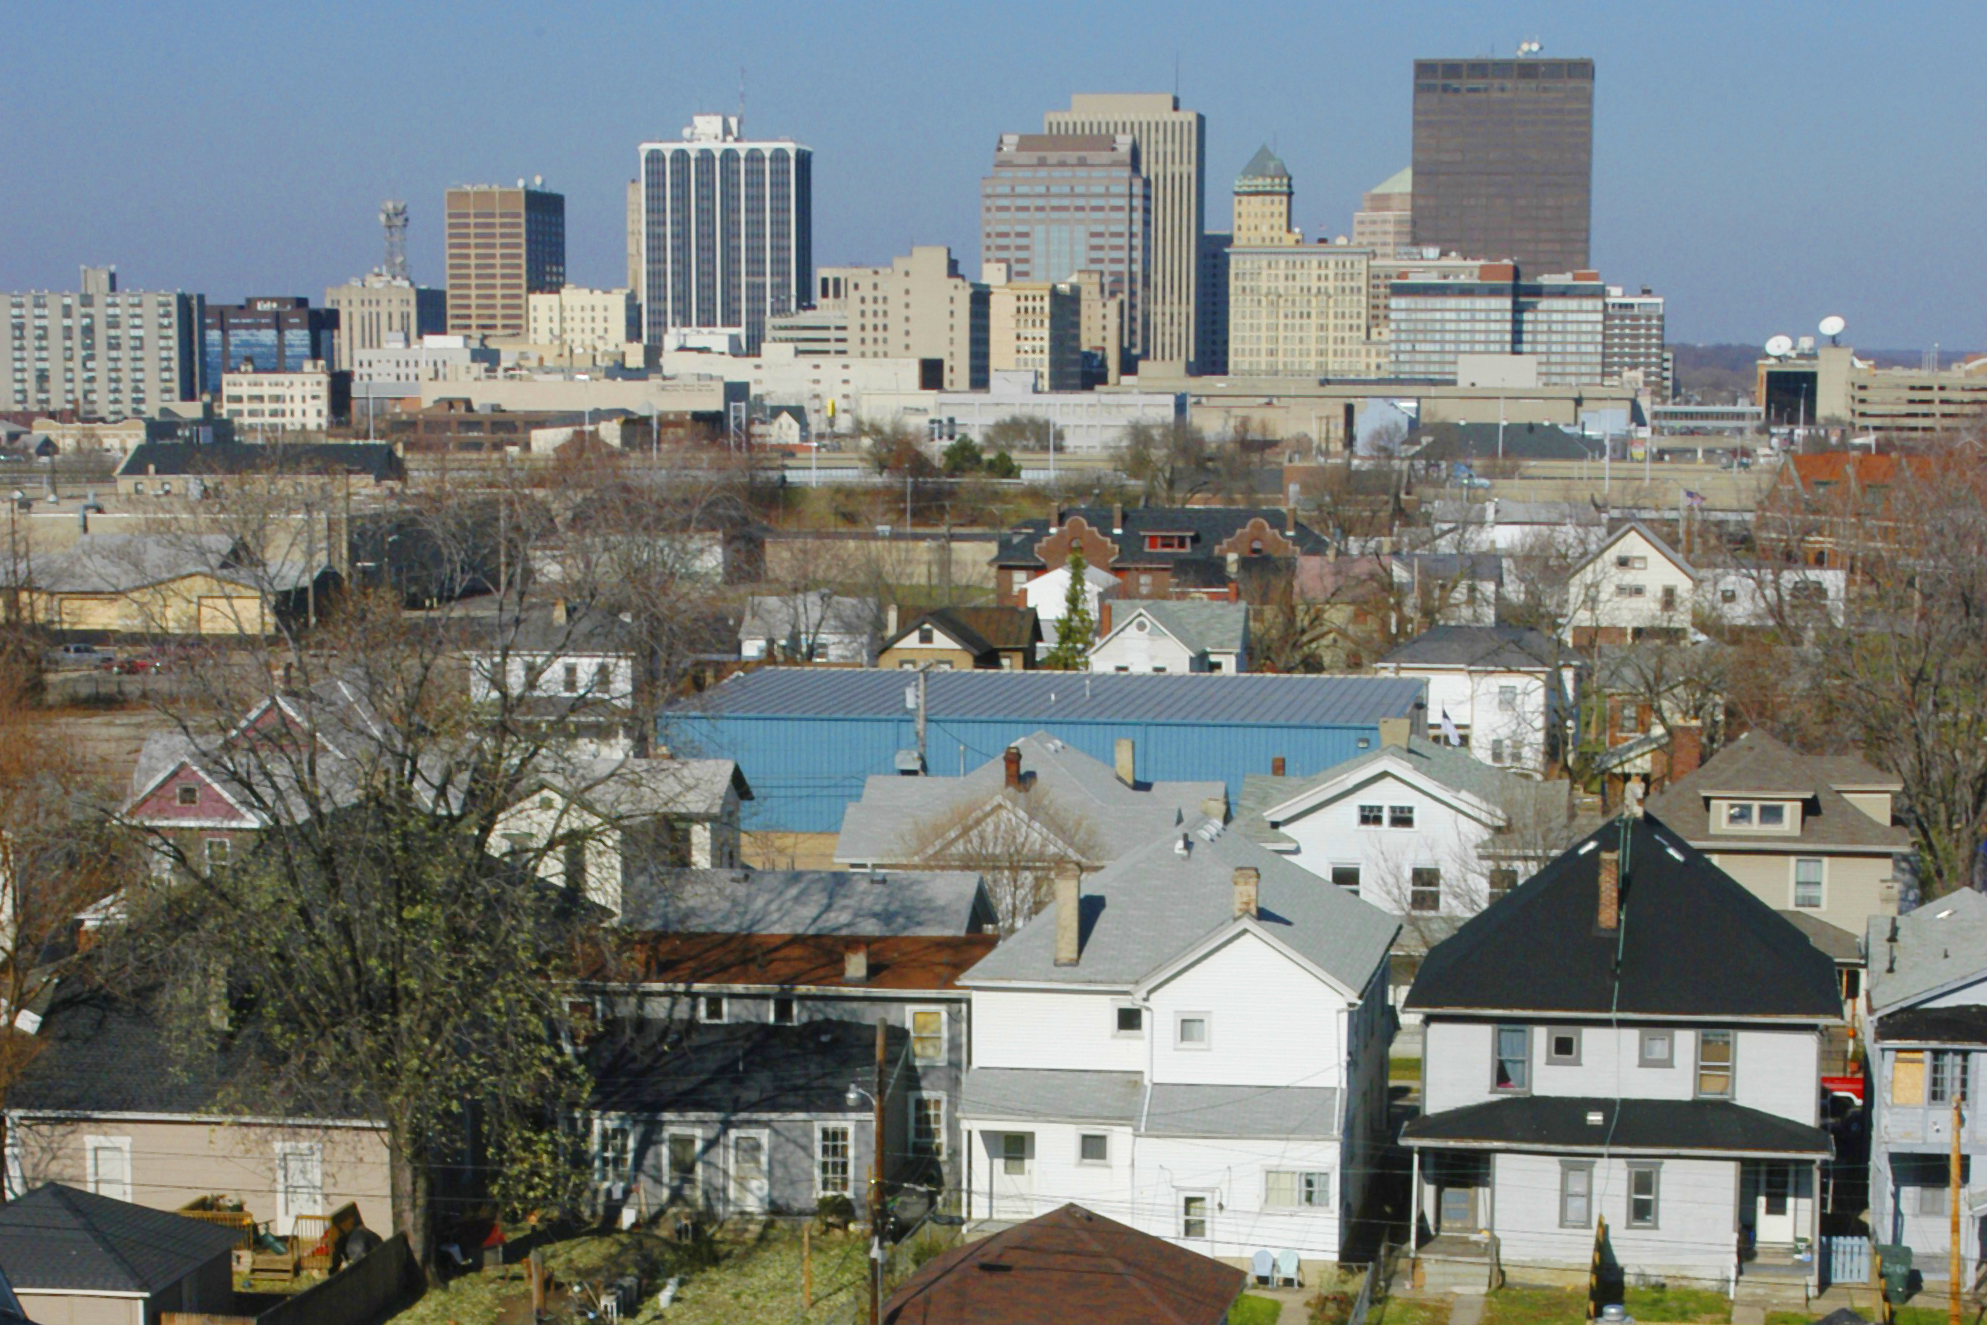 Cityscape with suburban homes in the foreground and a city skyline in the background.